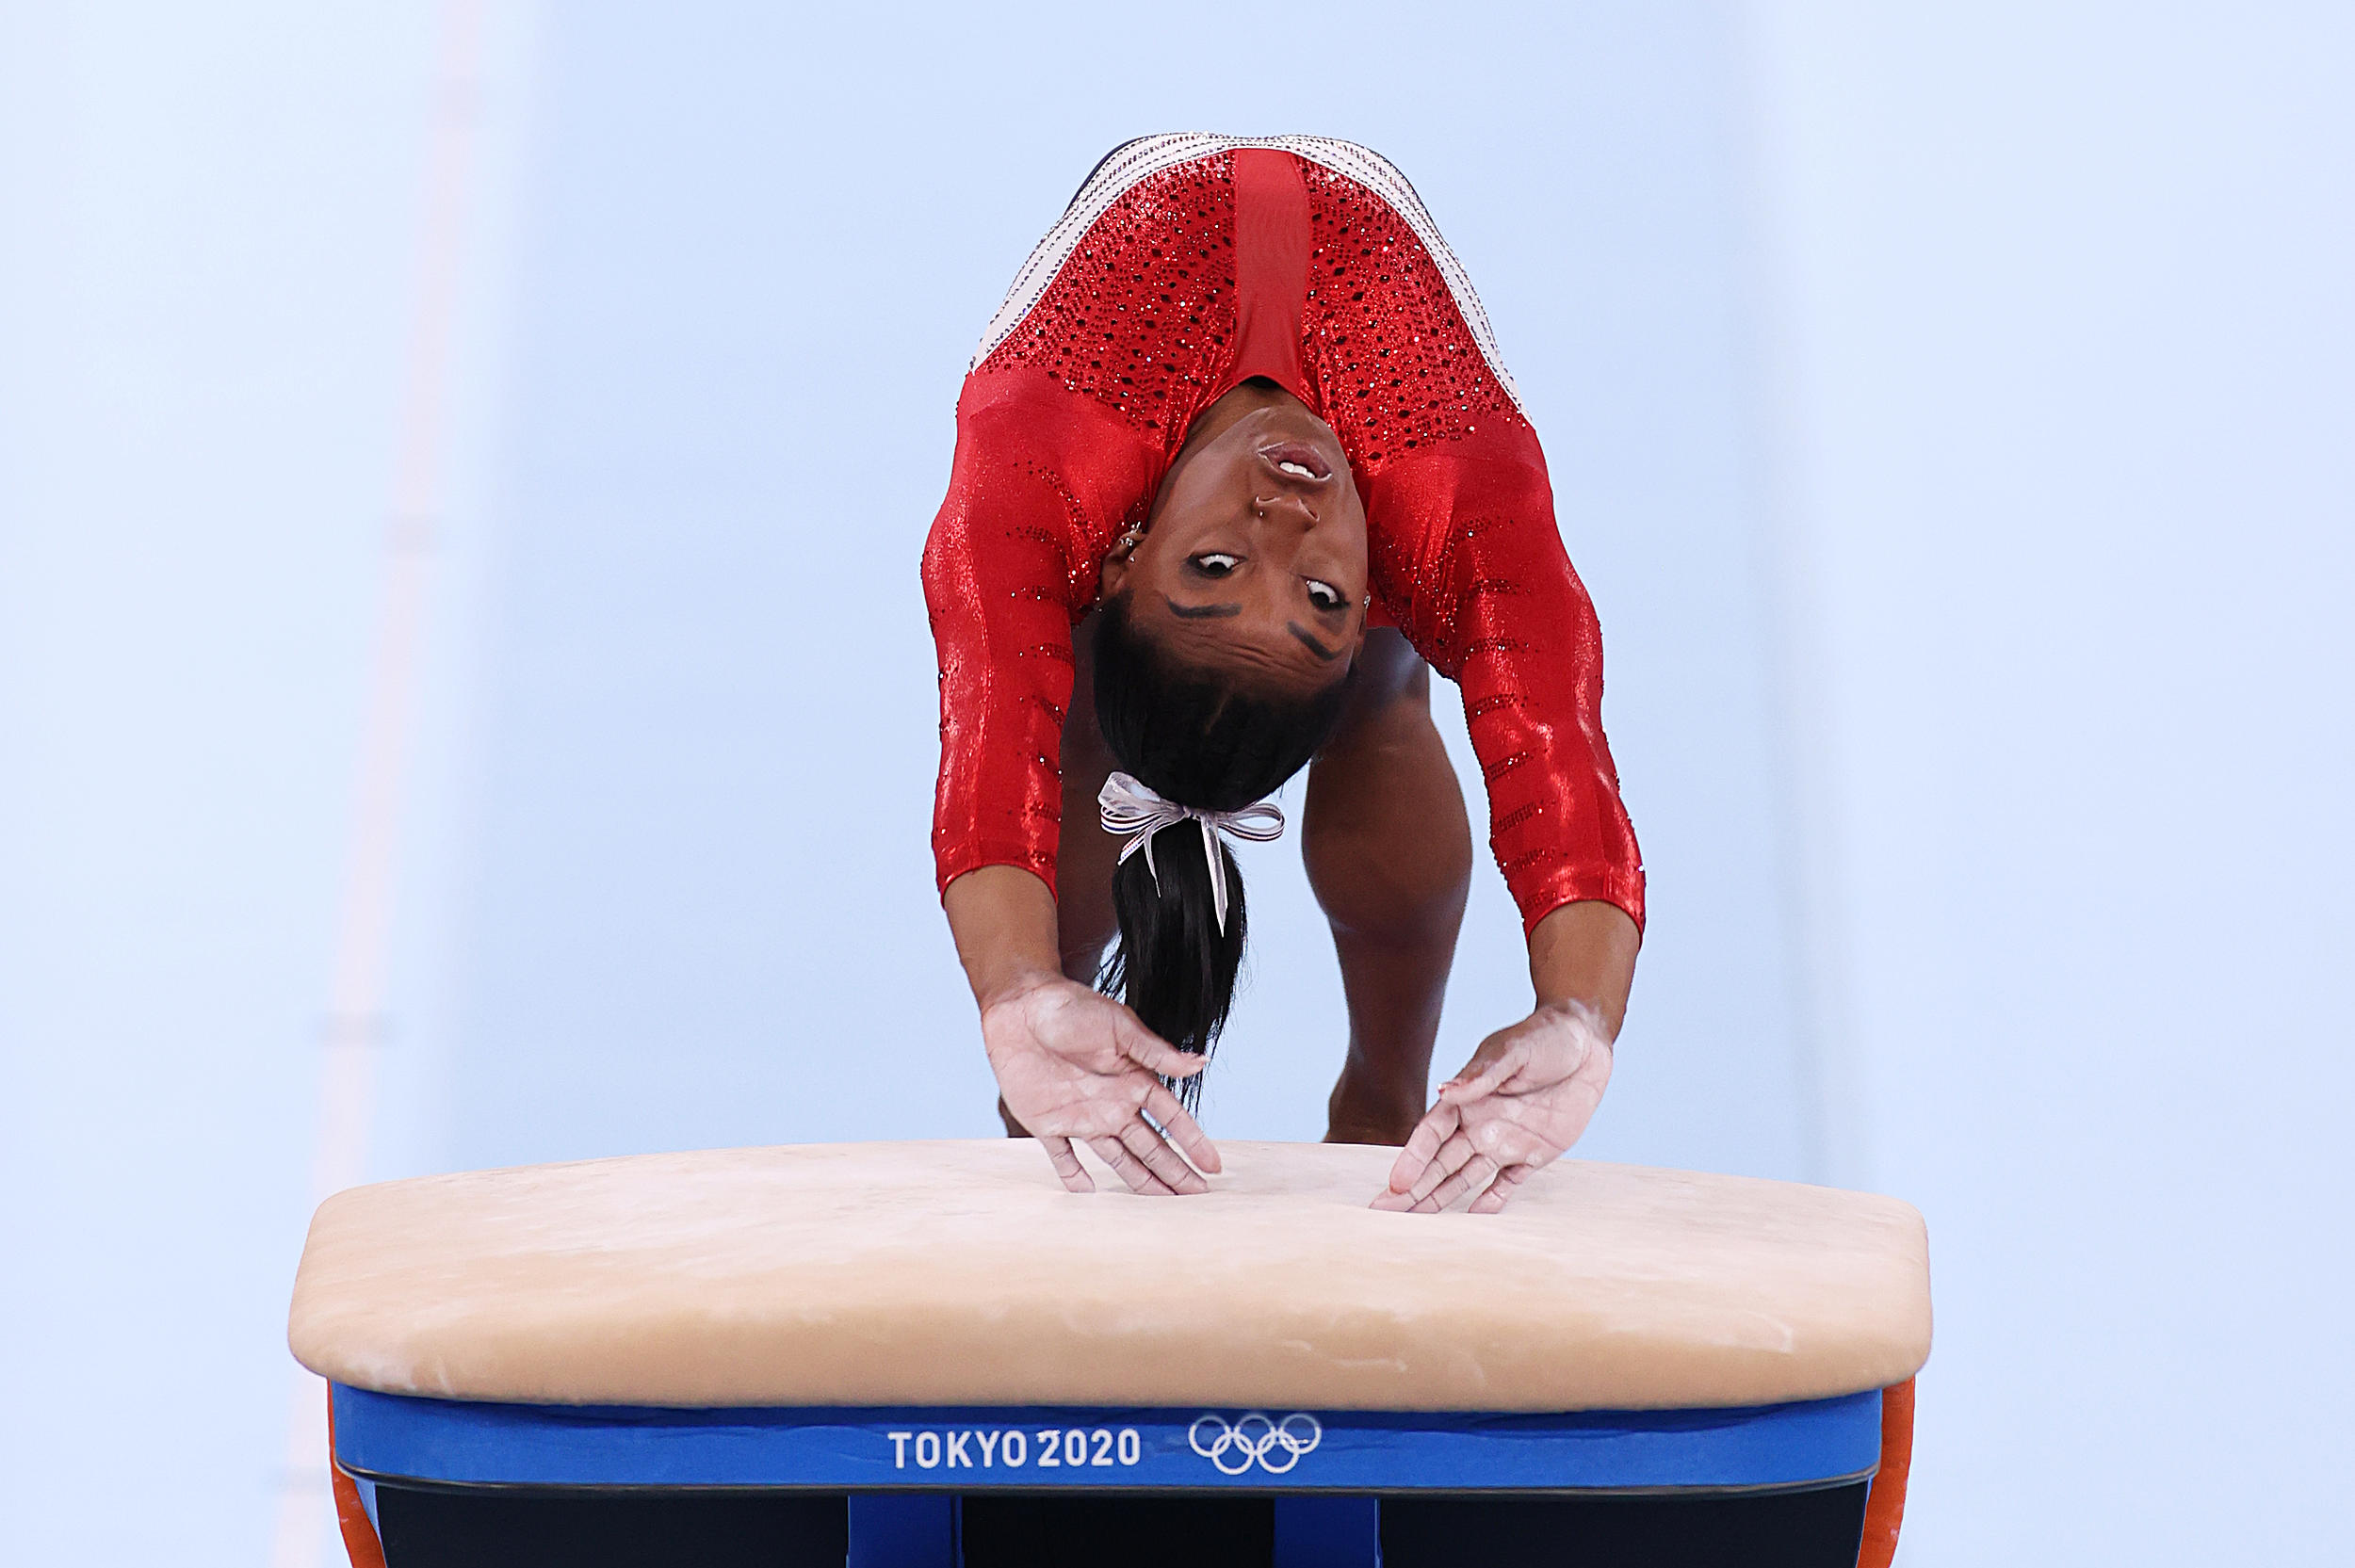 Simone Biles Out of Women's Olympic Gymnastics Final in Tokyo